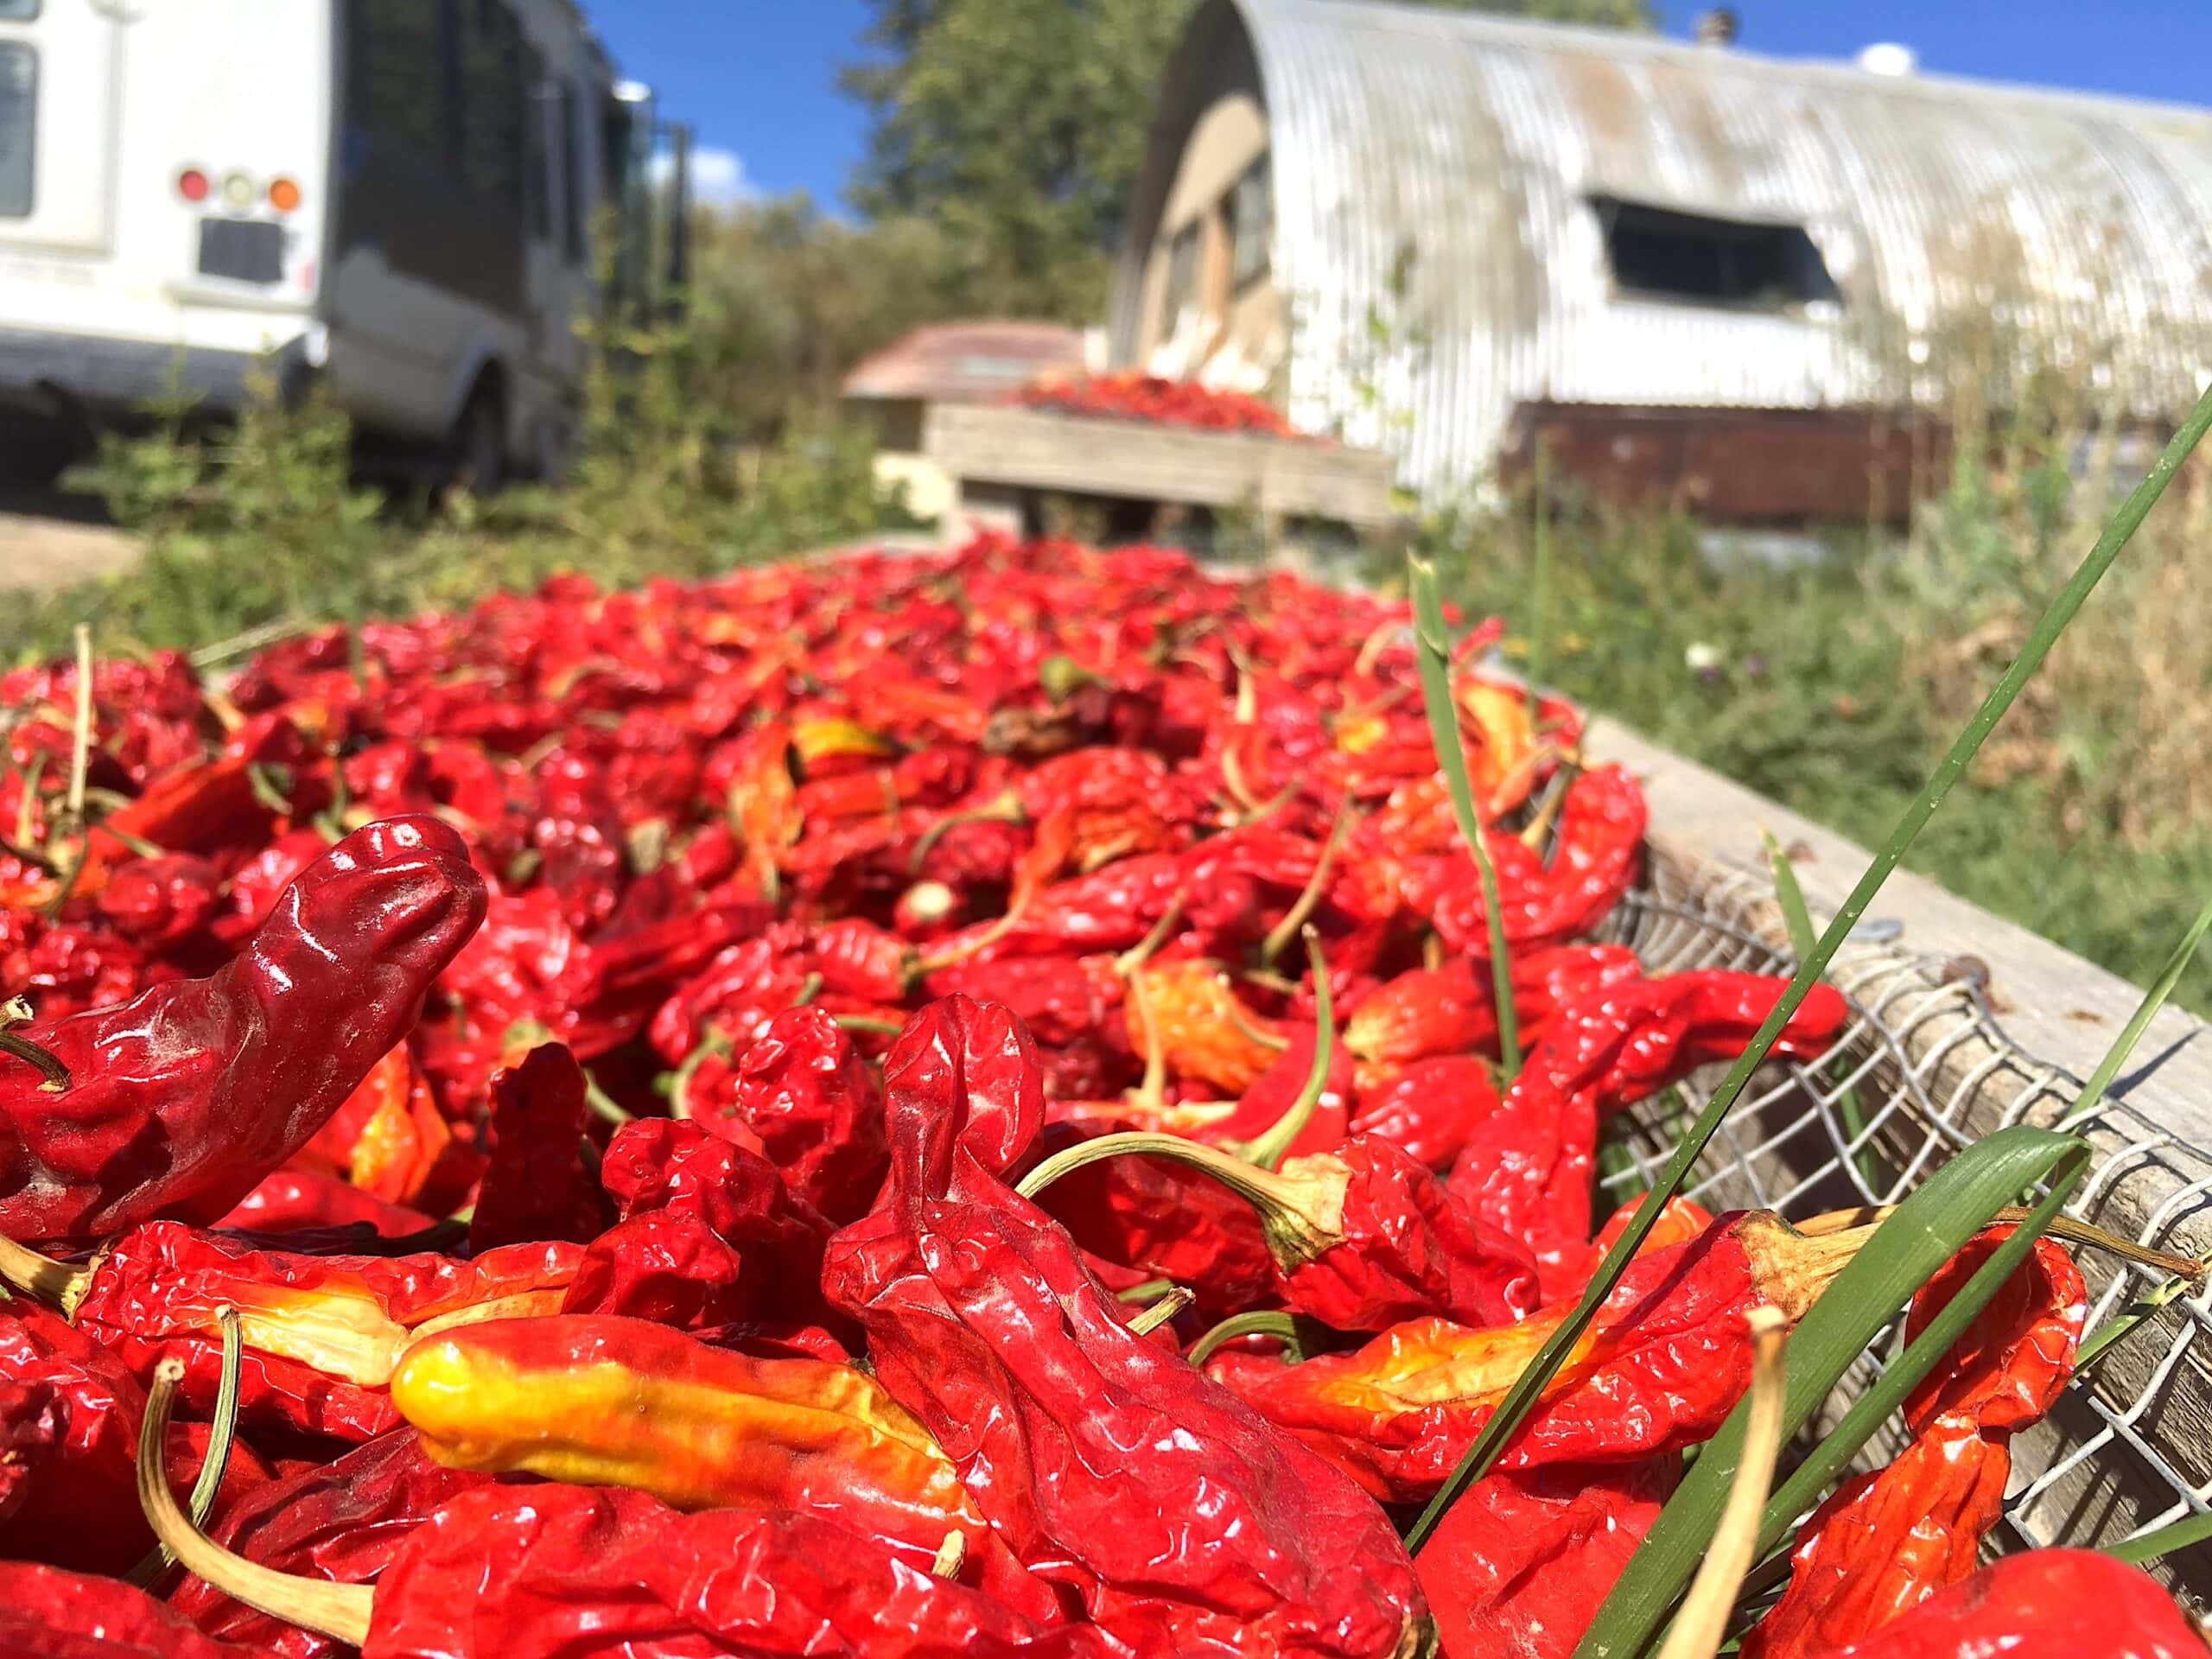 Shishito peppers grow like crazy at Black Cat Farm in Boulder, Colorado, a certified organic and biodynamic operation that supplies the farm-to-table restaurants Black Cat Bistro and Bramble & Hare with produce across the year.